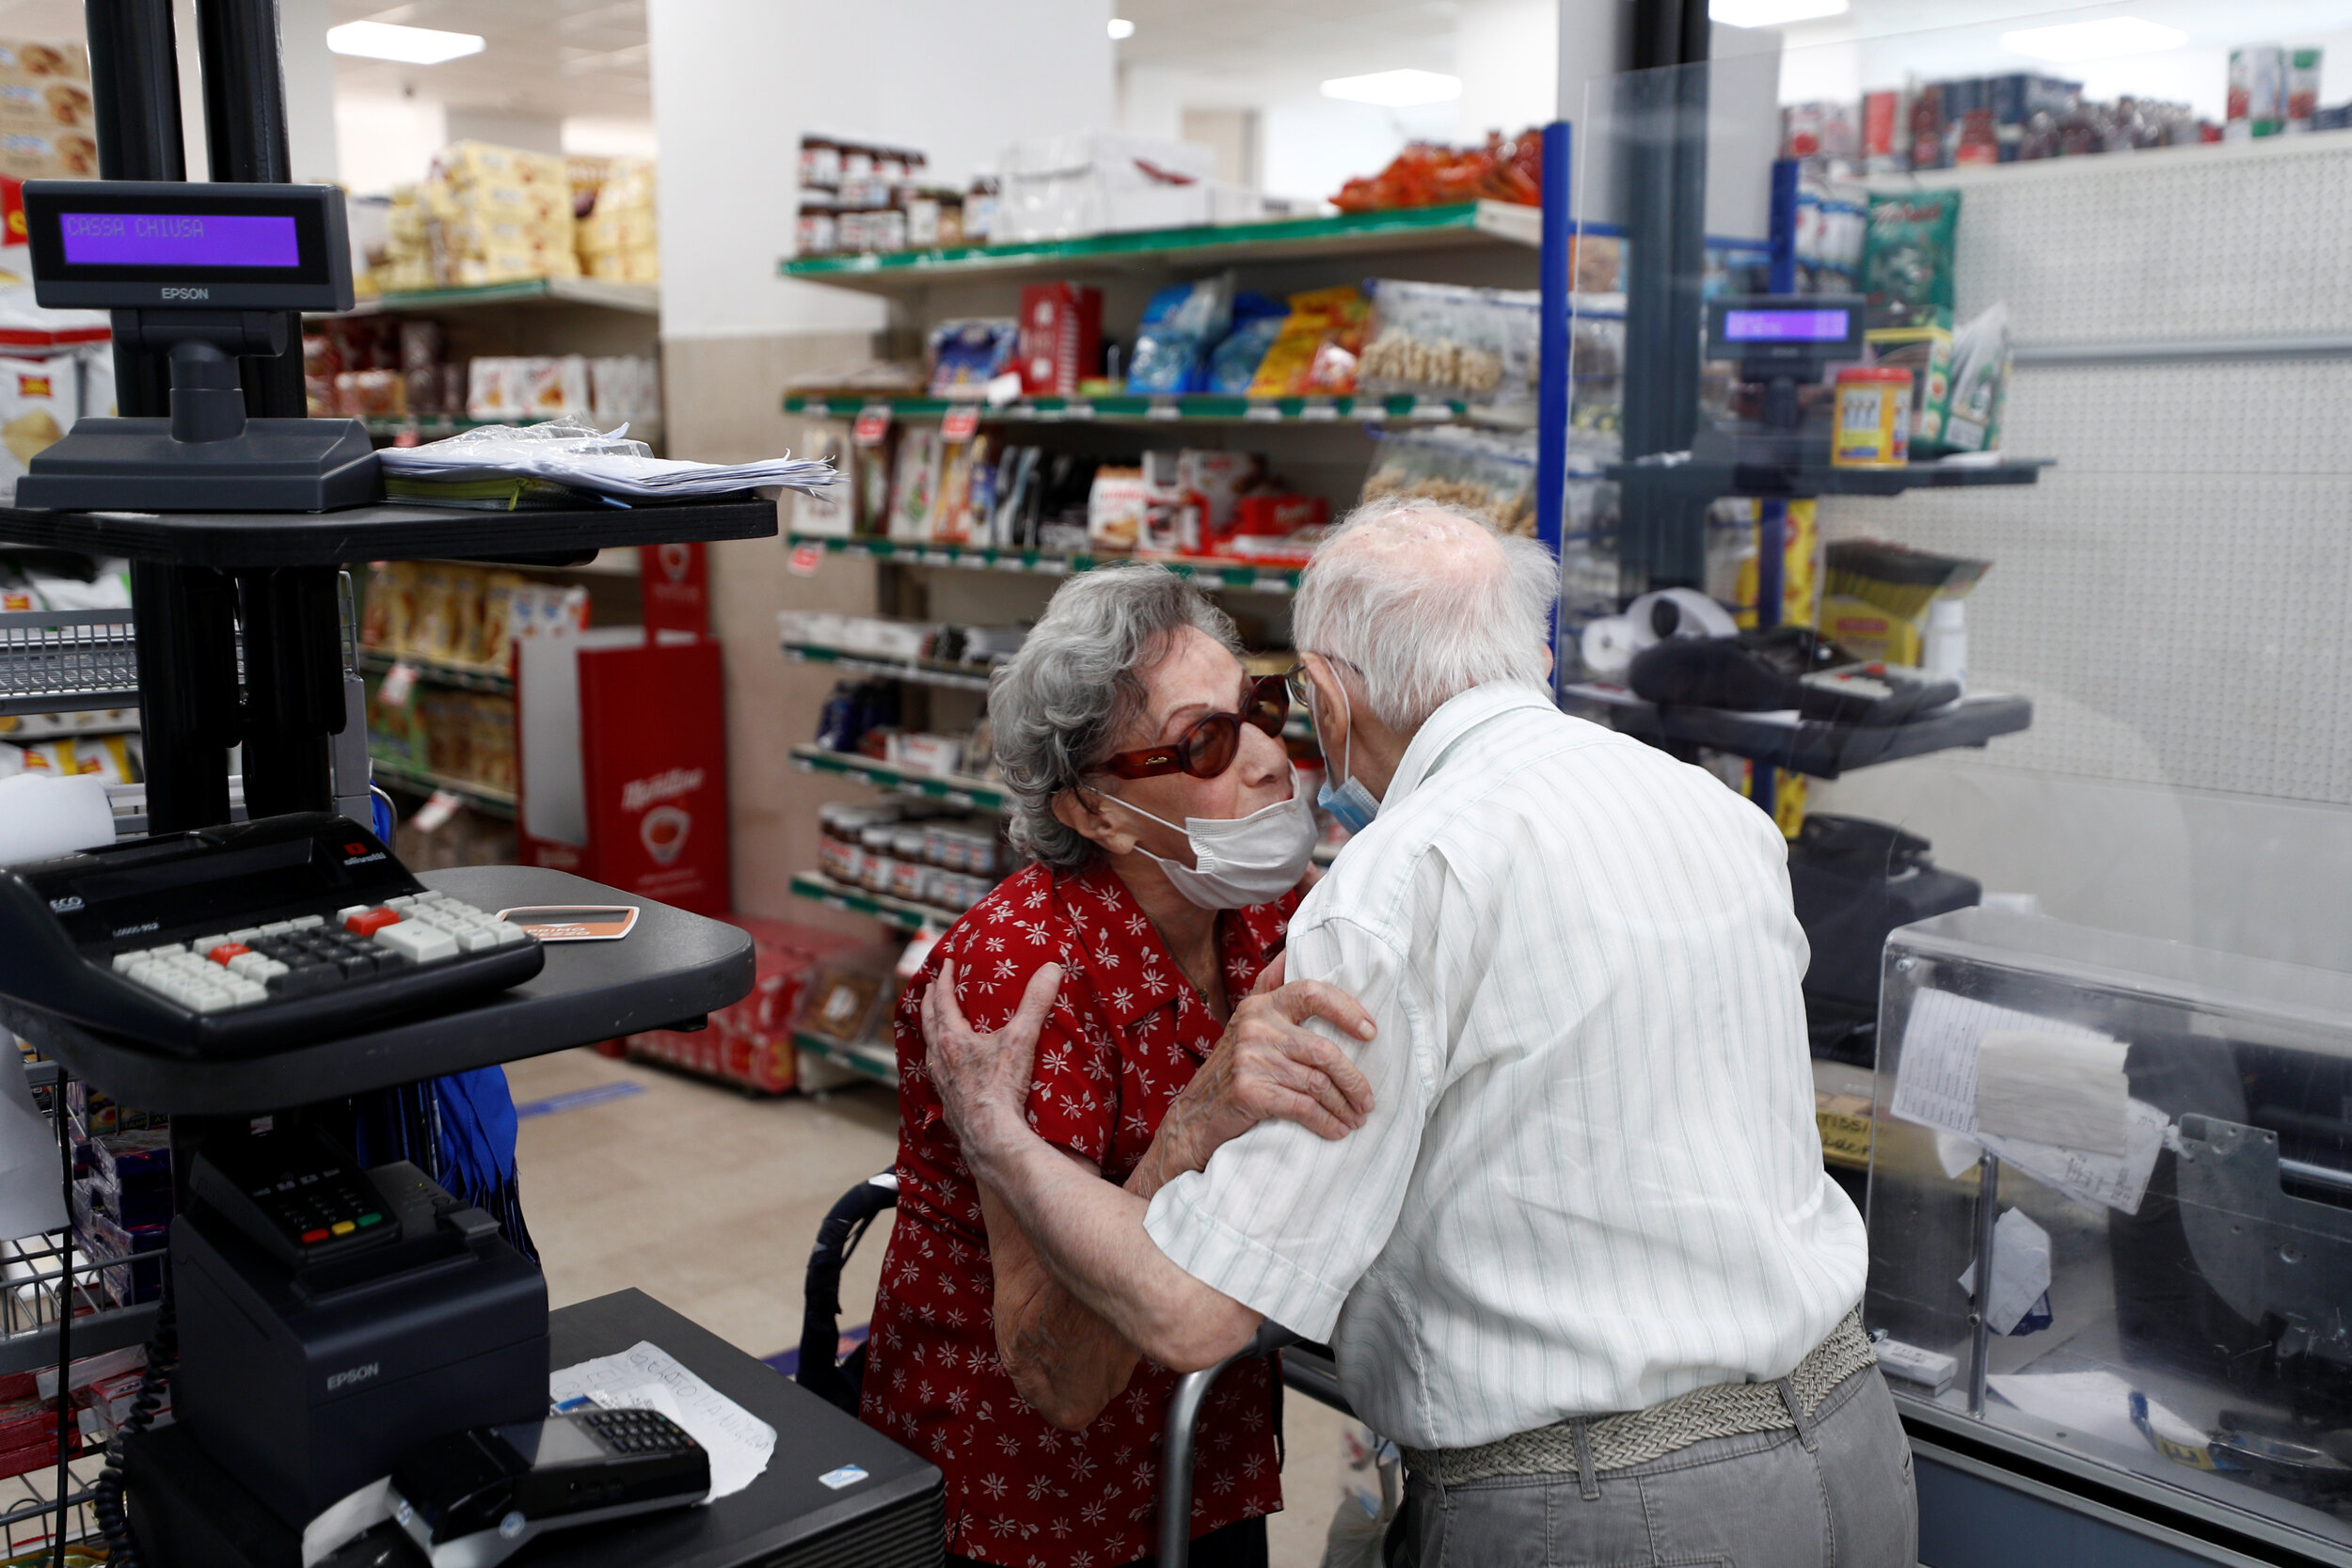  Giuseppe Paterno, 96, Italy's oldest student, hugs a friend at a supermarket, two days before he graduates from The University of Palermo with an undergraduate degree in history and philosophy, Italy, July 27, 2020. 